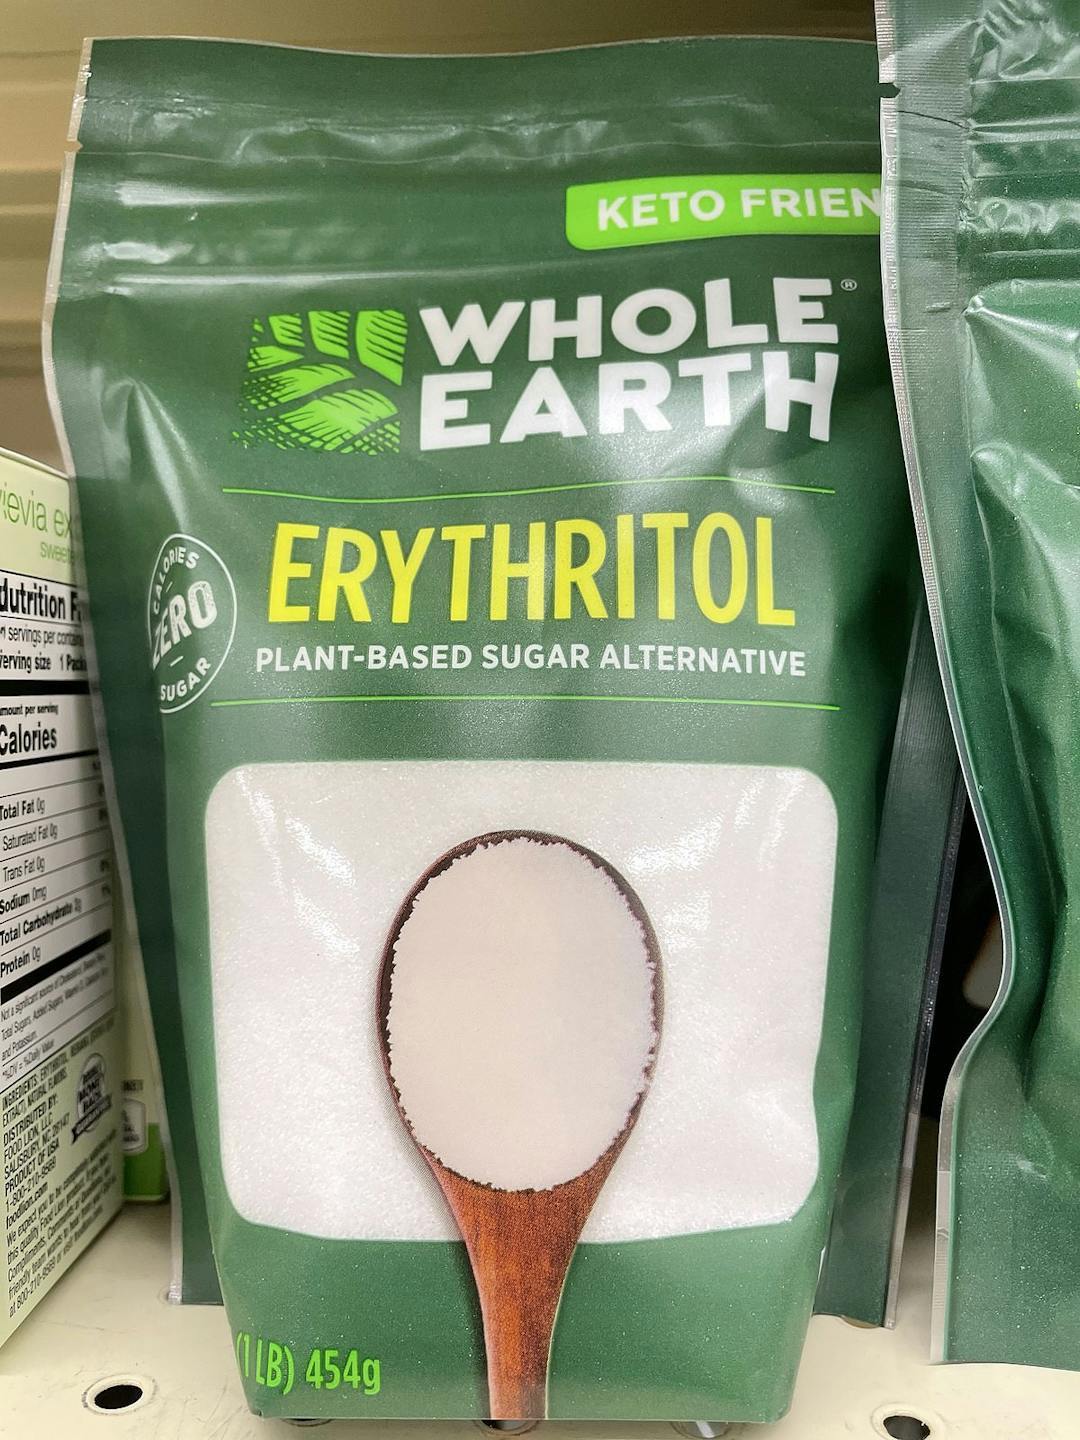 Grovetown, Ga USA &#8211; 03 13 22: Artificial sweeteners on retail store shelf Whole earth Erythritol
